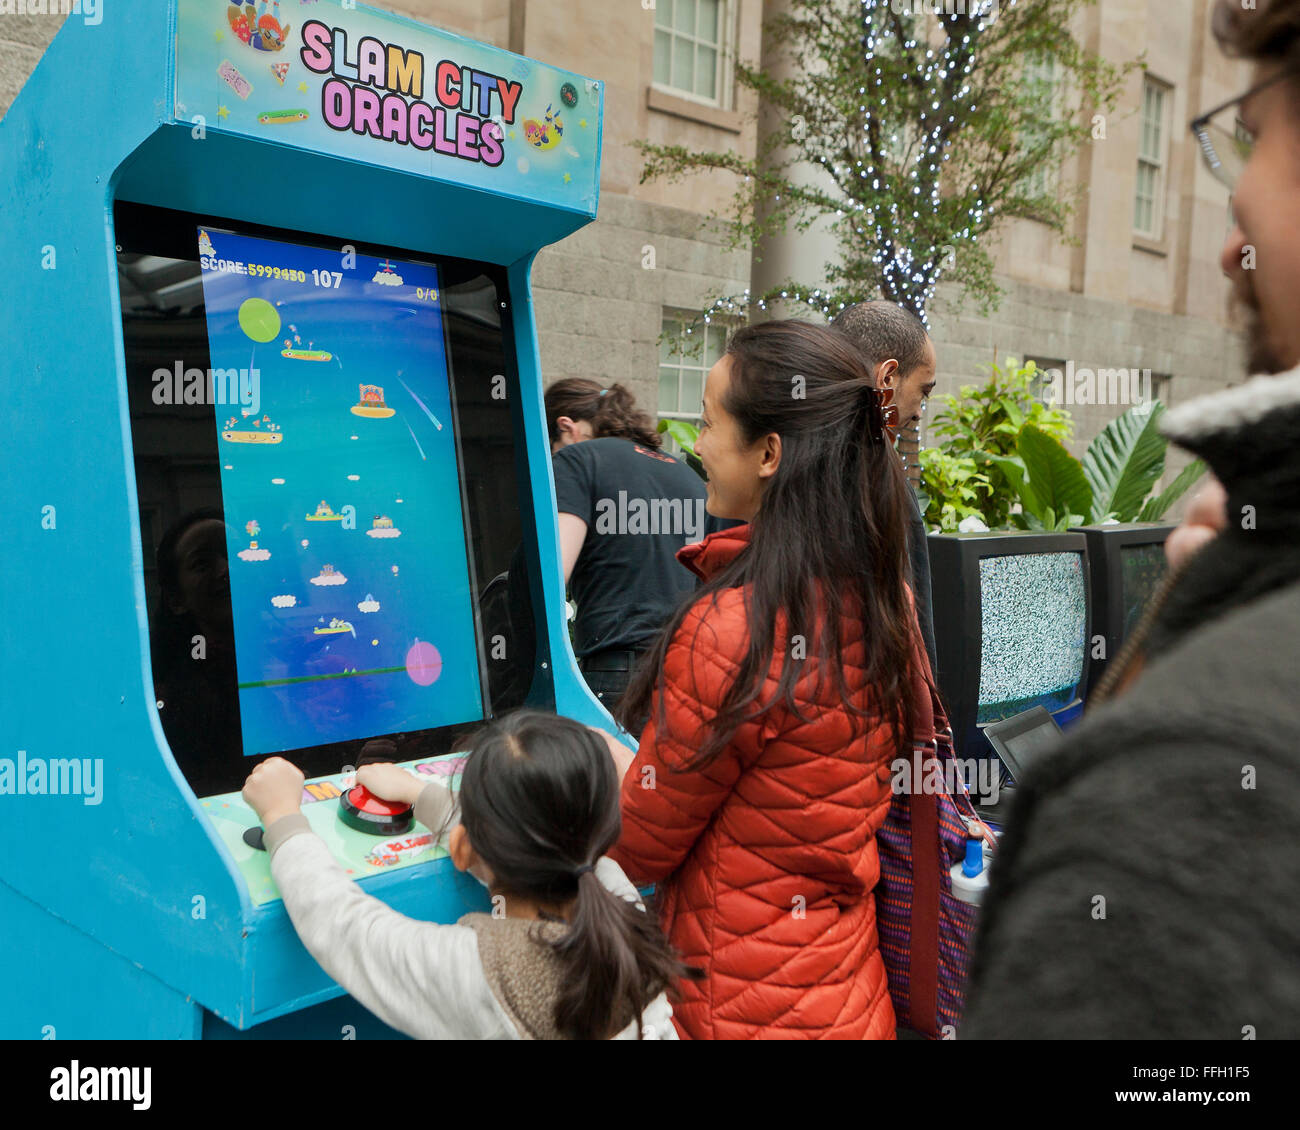 Asian mother and daughter playing Slam City Oracles video arcade game - USA Stock Photo